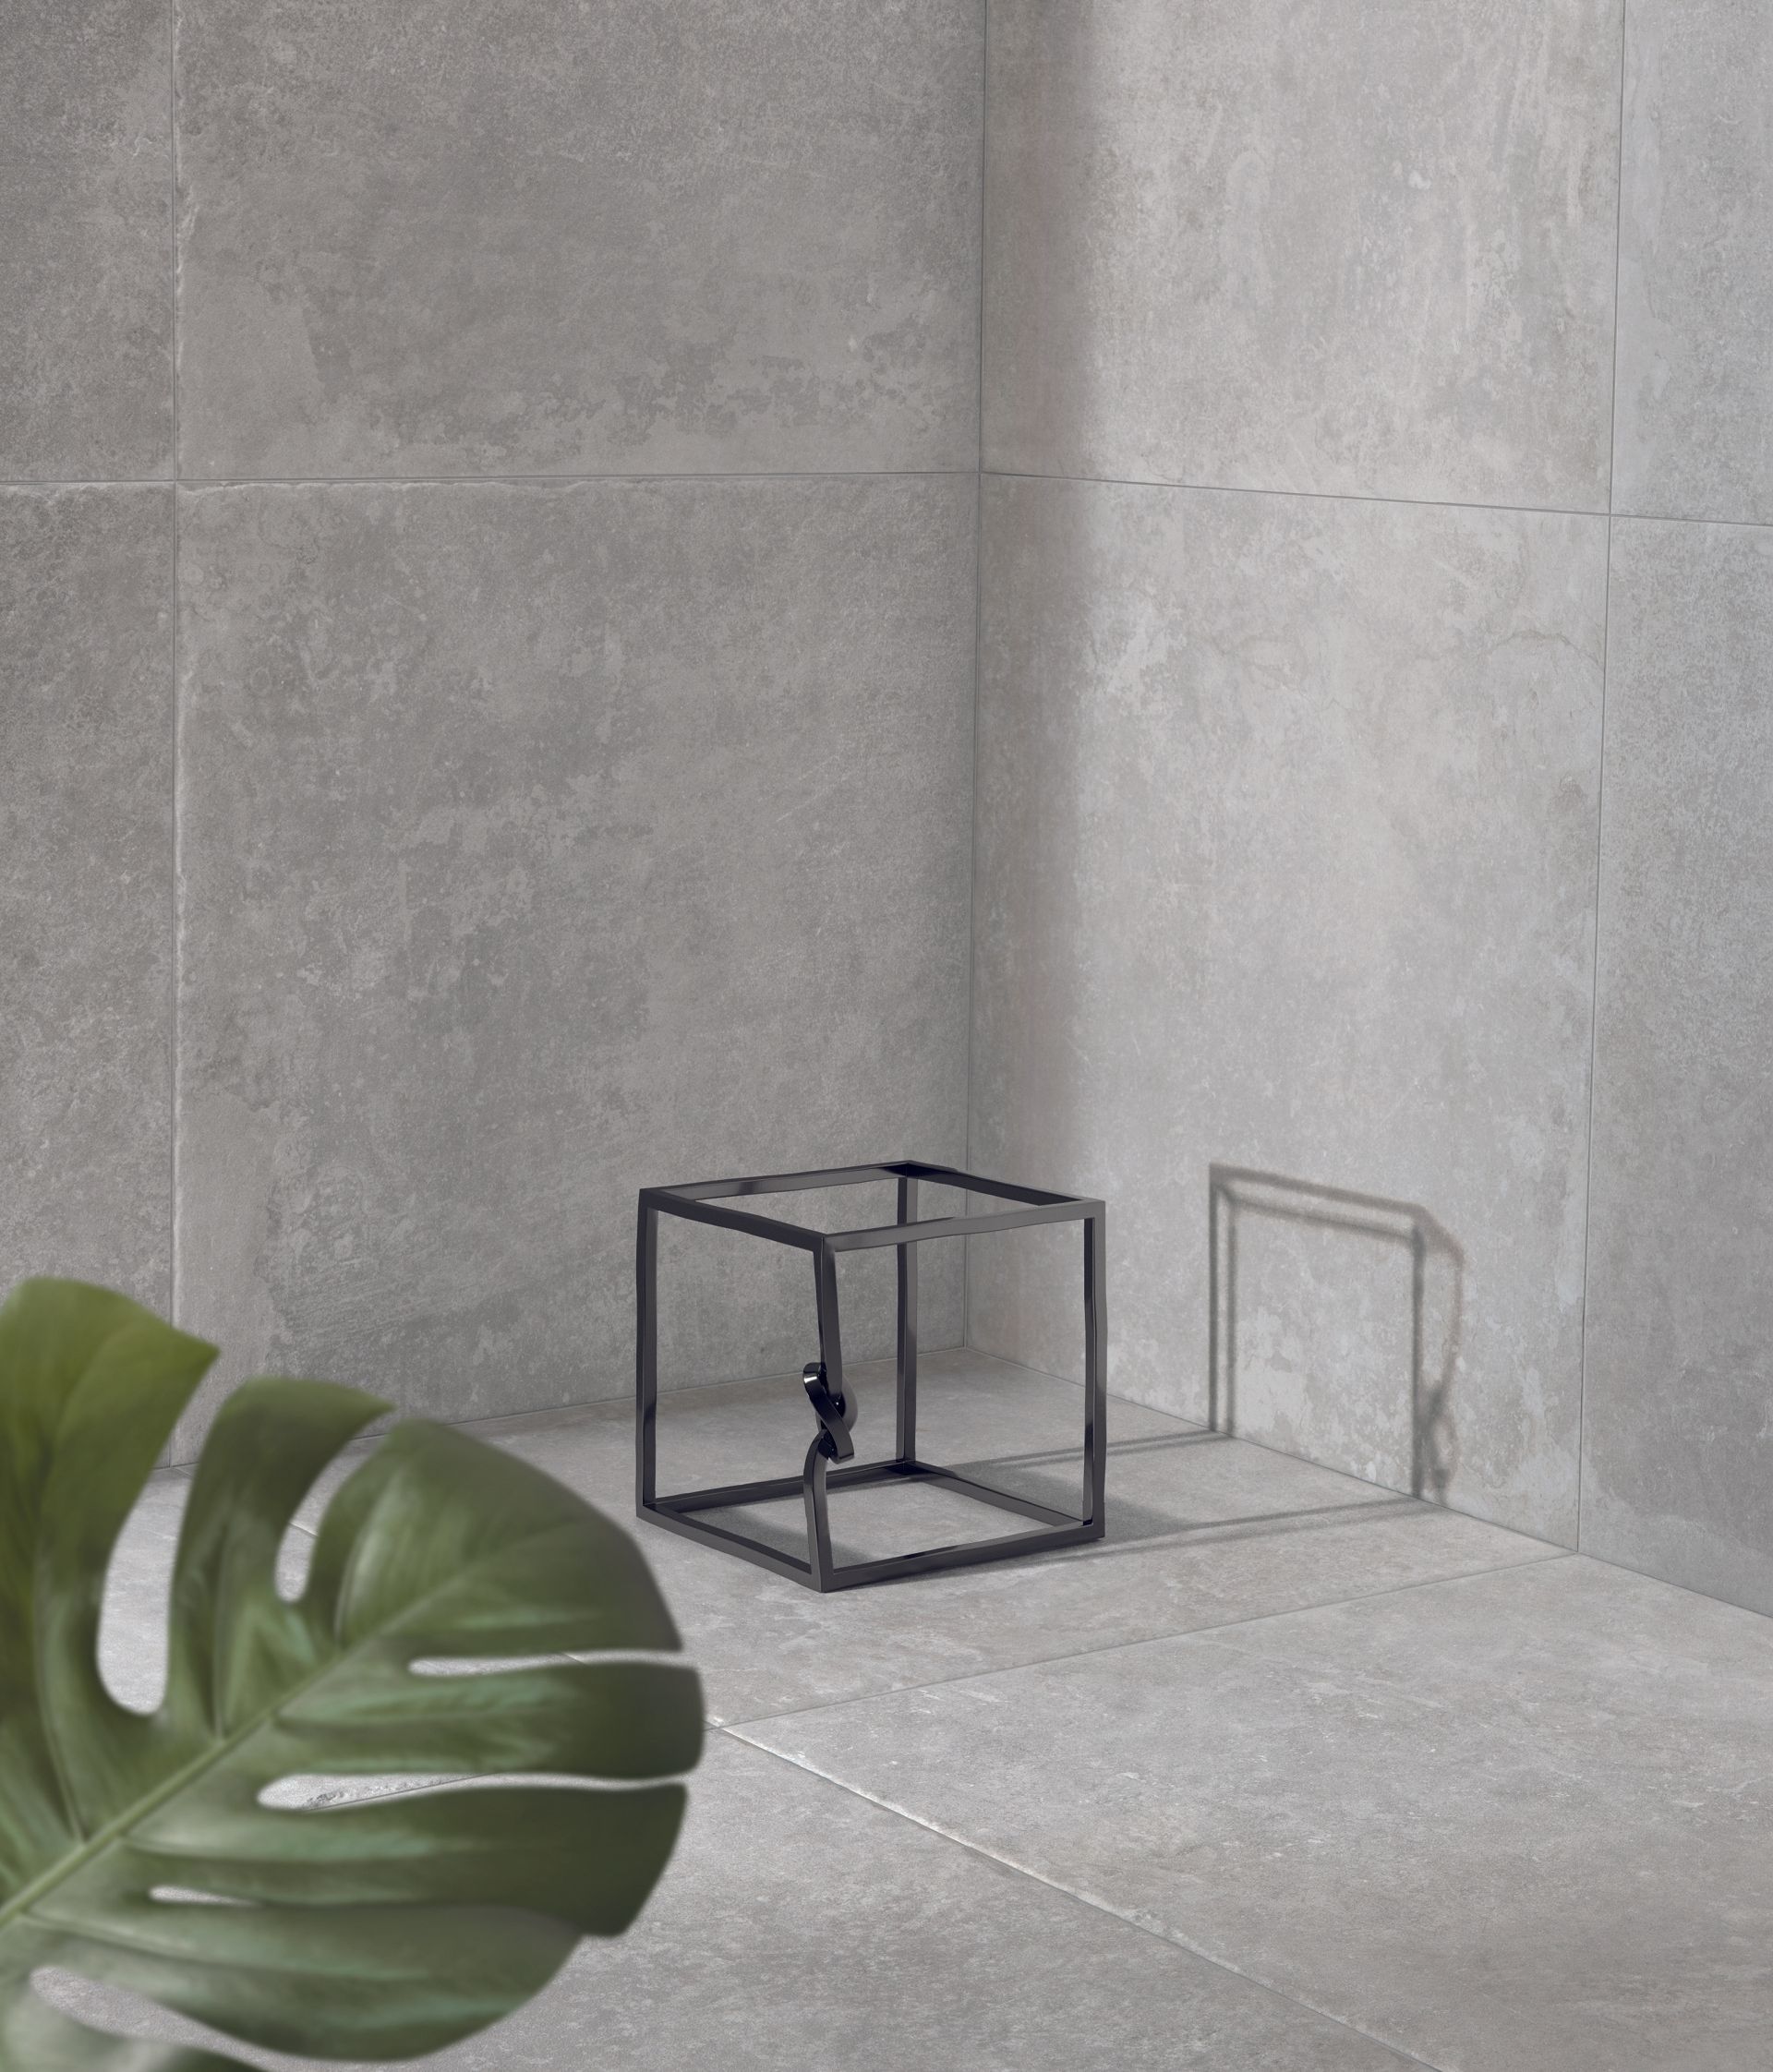 limestone effect tiles with a metal frame cube with a plant leaf